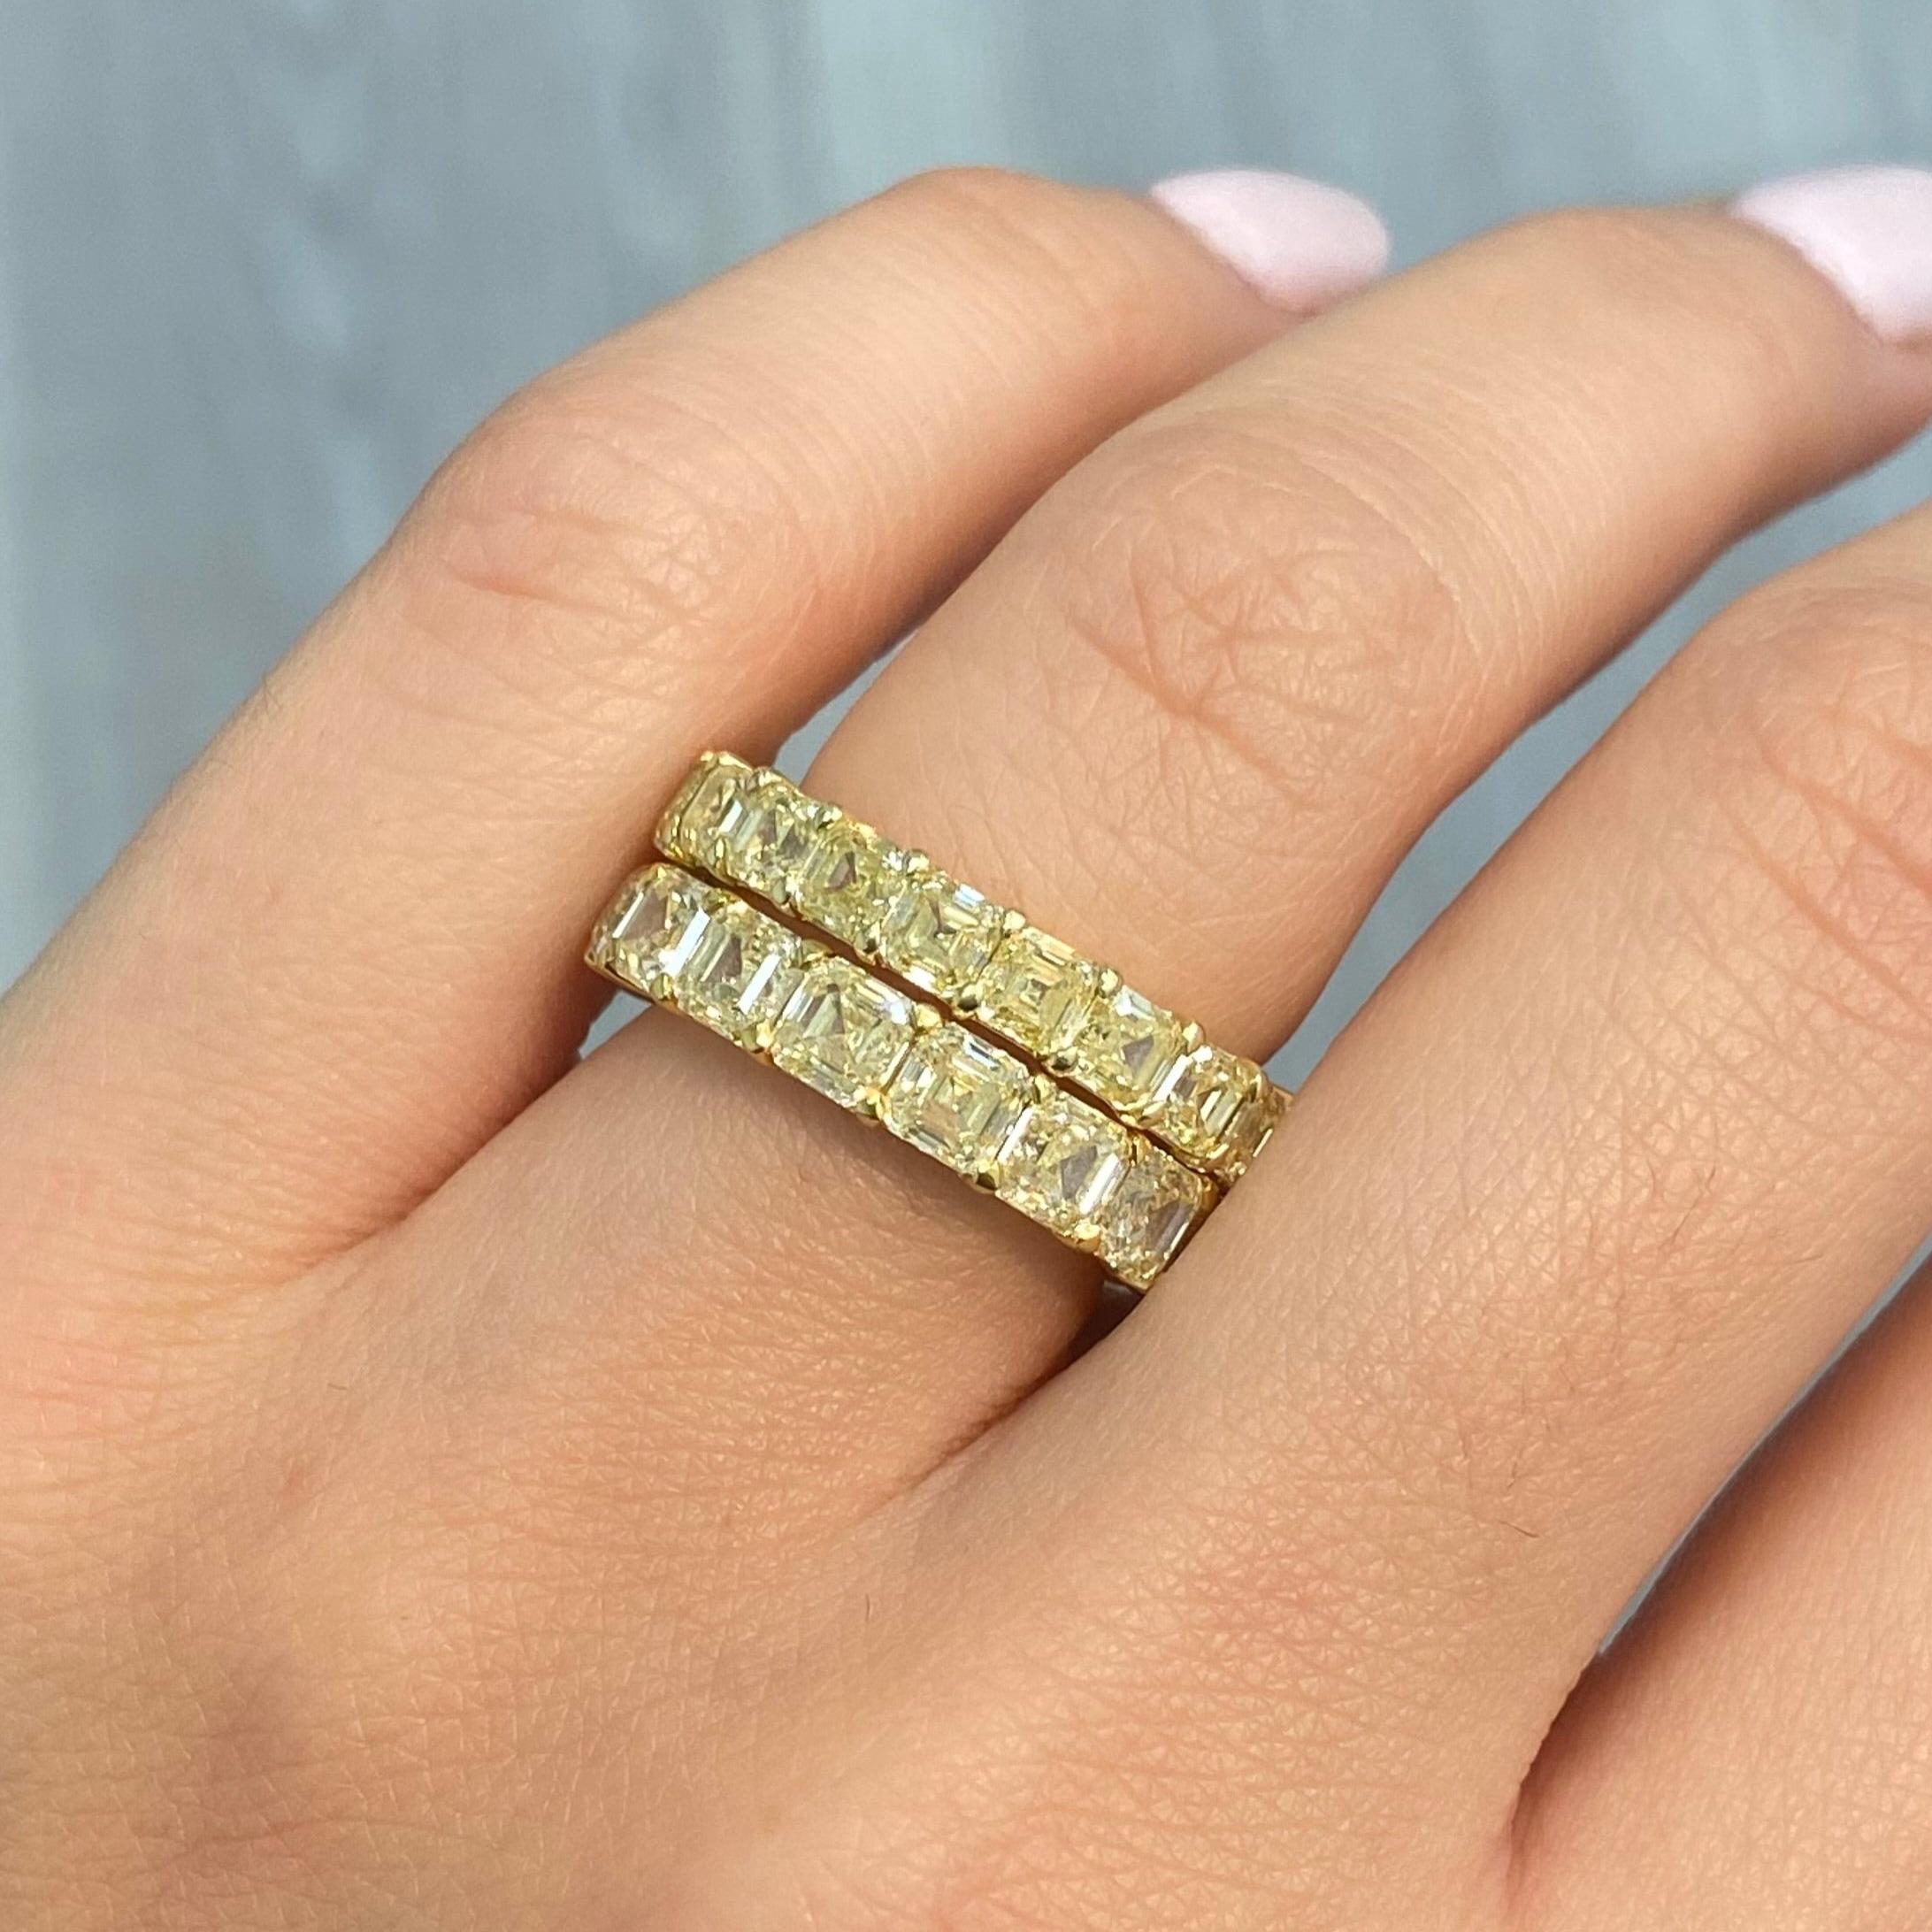 6.15 Carats
Fancy Yellow
Asscher Cuts
17 Individual Diamonds
VS Clarity
Set in 18k Yellow Gold 
Handmade in NYC 

This piece can be viewed before purchase in our showroom in NYC, or at one of our retail partners throughout the country, please